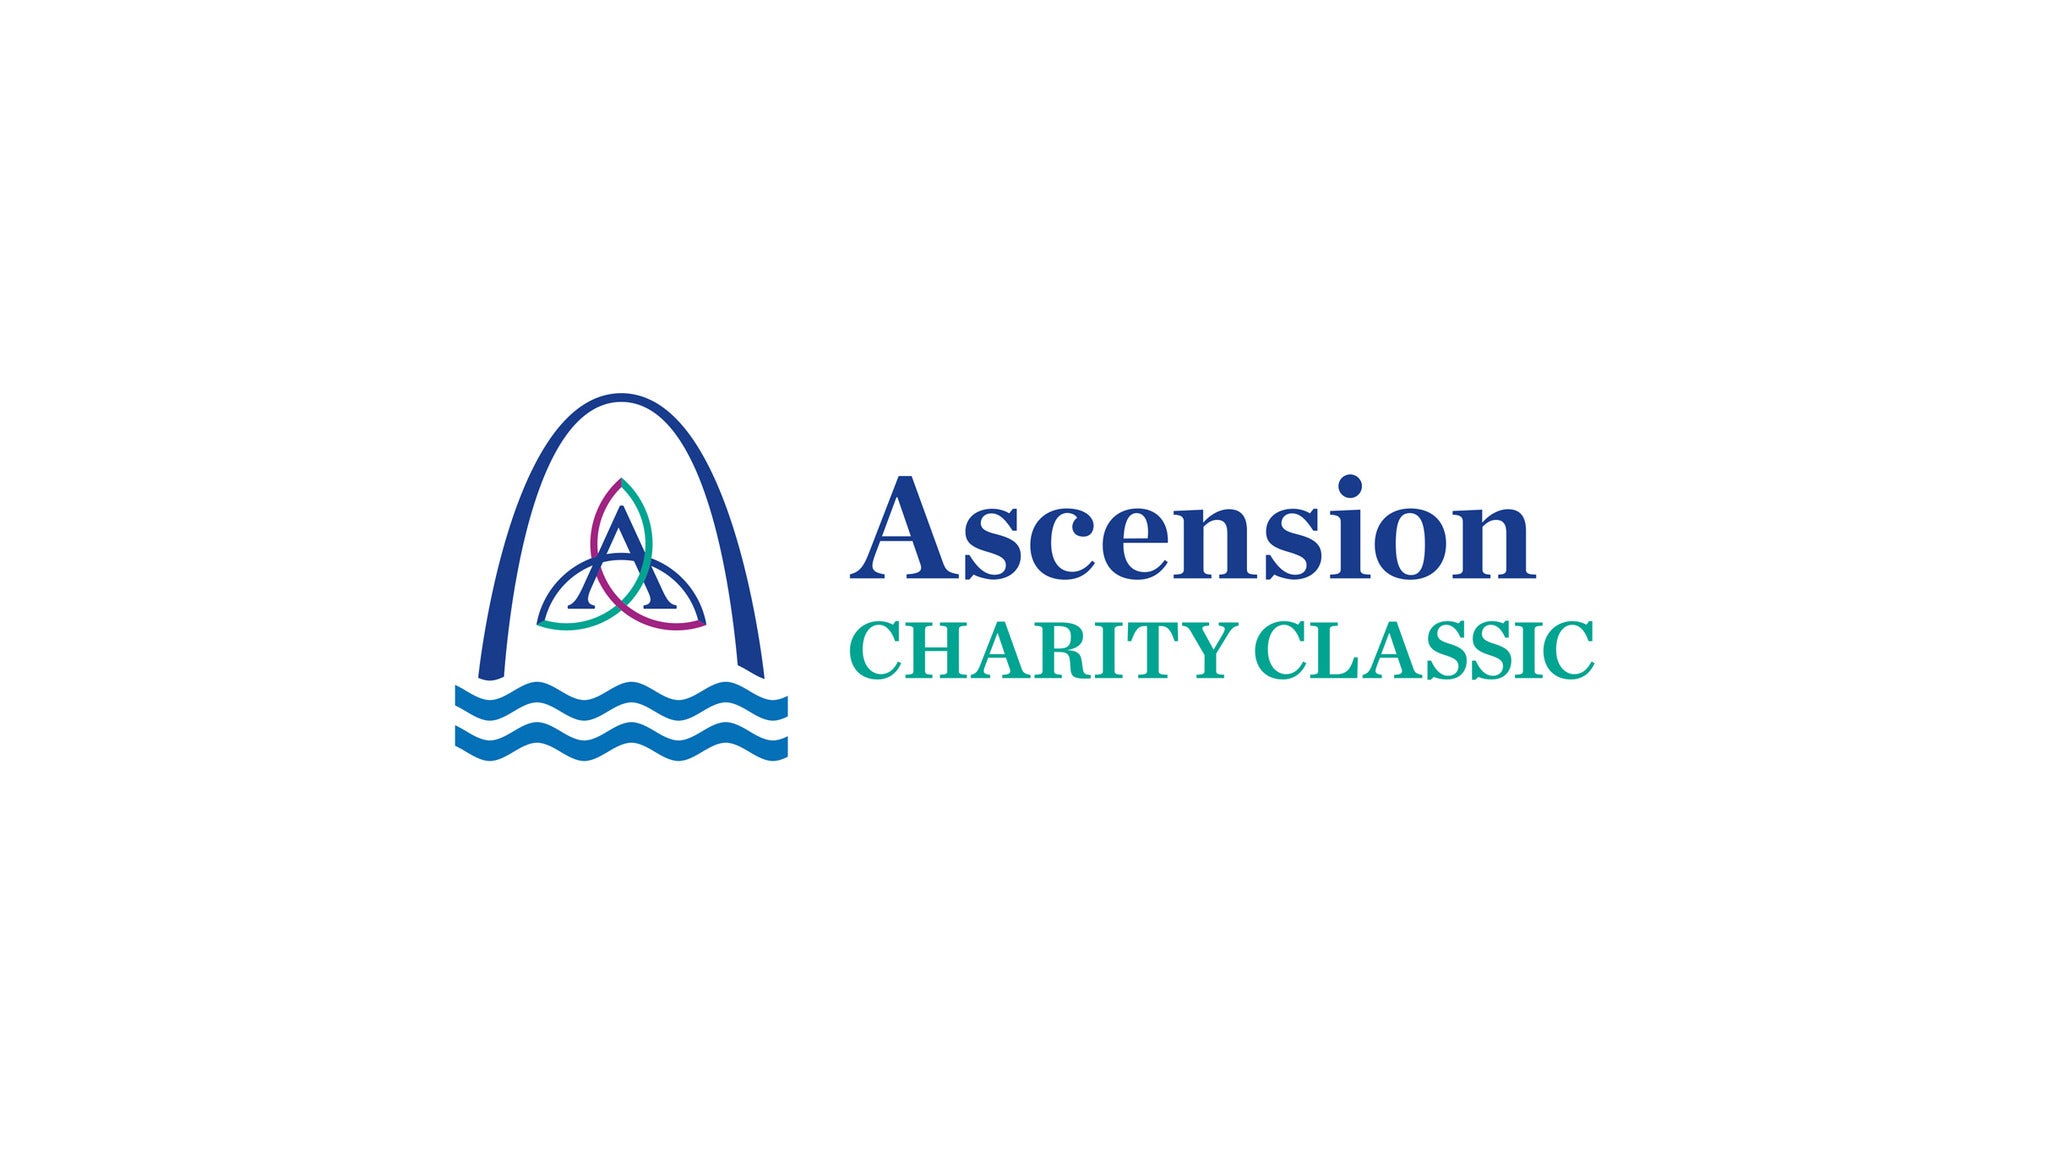 Ascension Charity Classic presented by Emerson presale information on freepresalepasswords.com